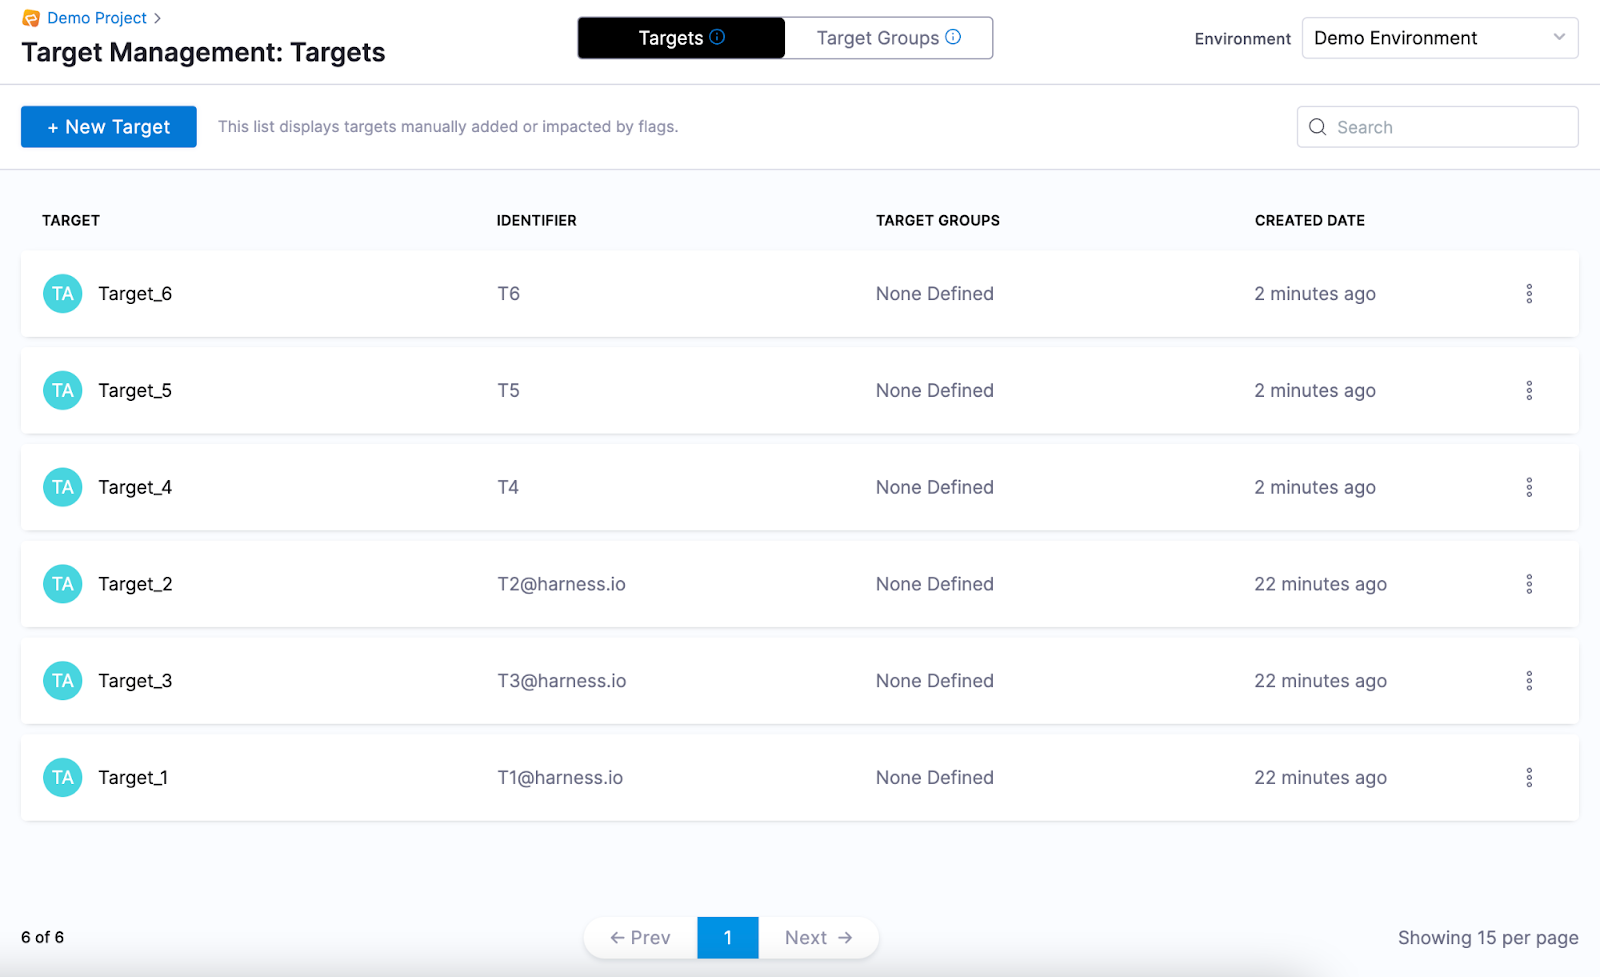 A screenshot of the Target Management page with a list of all the targets.